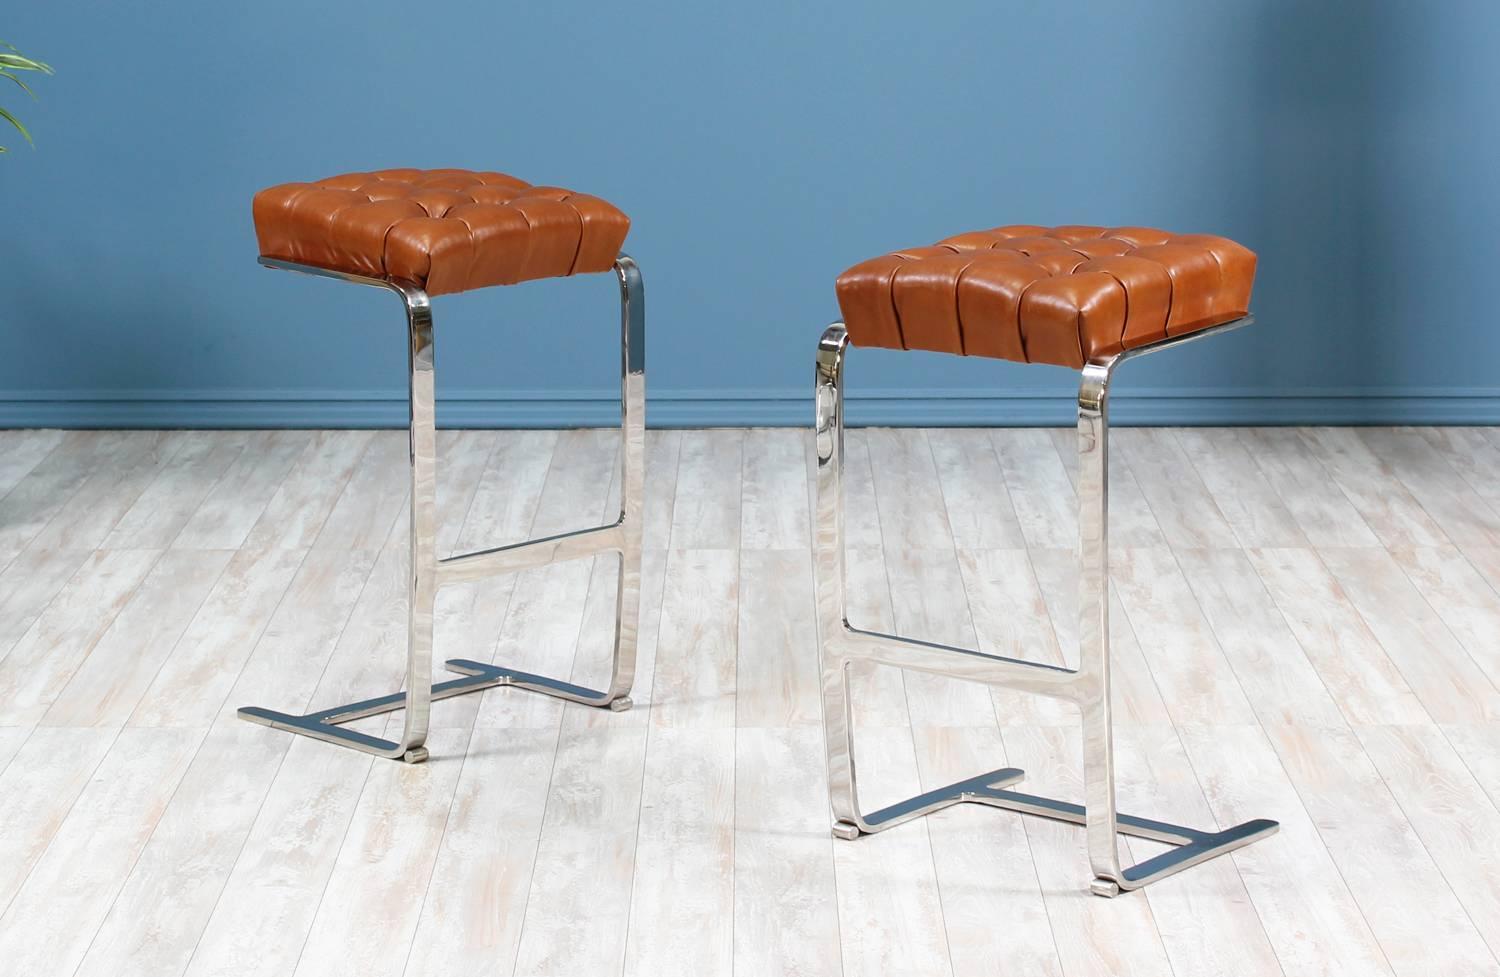 Mid Century Modern bar stools designed by Mies van der Rohe for Knoll Inc. in the United States circa 1970’s. A classy cantilevered design, featuring a bent flat steel chrome frame with a comfortable seat recently upholstered in a quality raw sienna